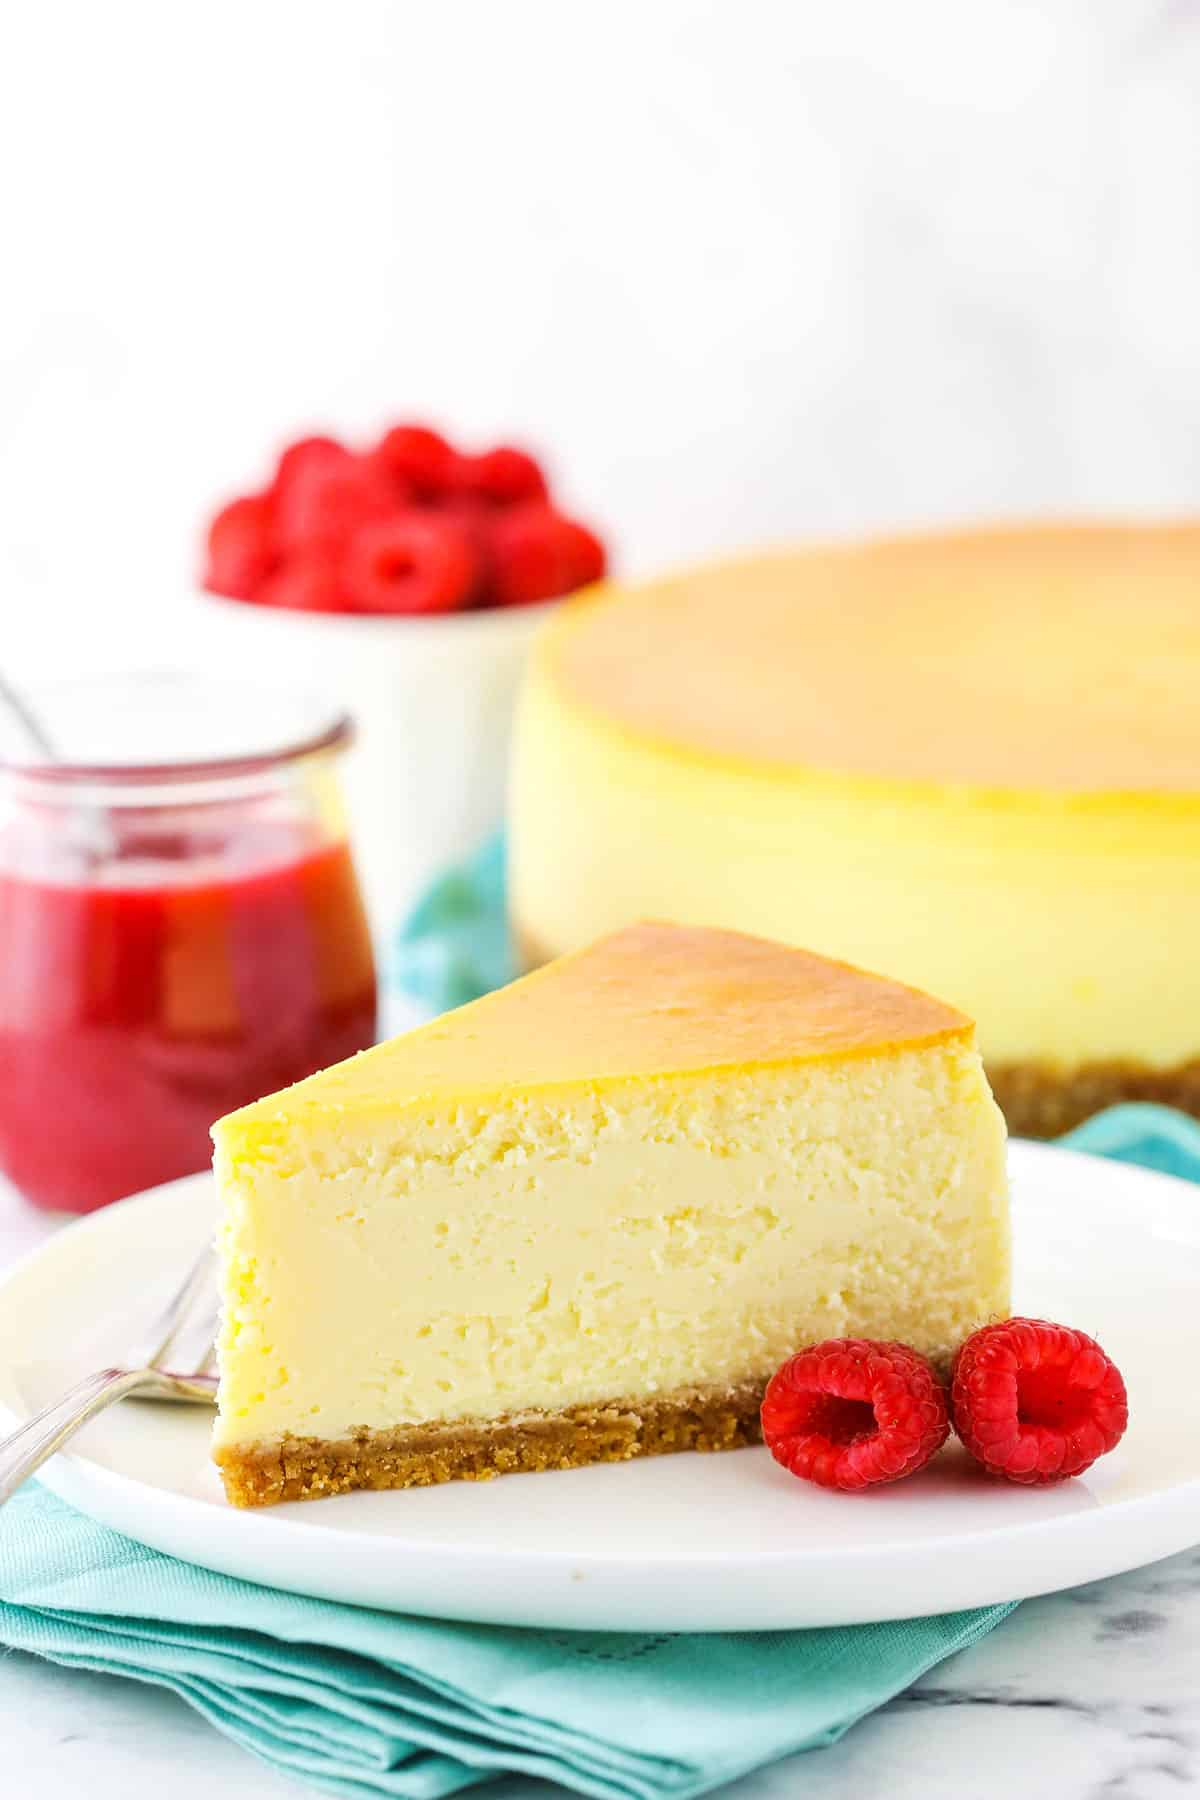 Slice of New York Style Cheesecake on a white plate with a fork and raspberries